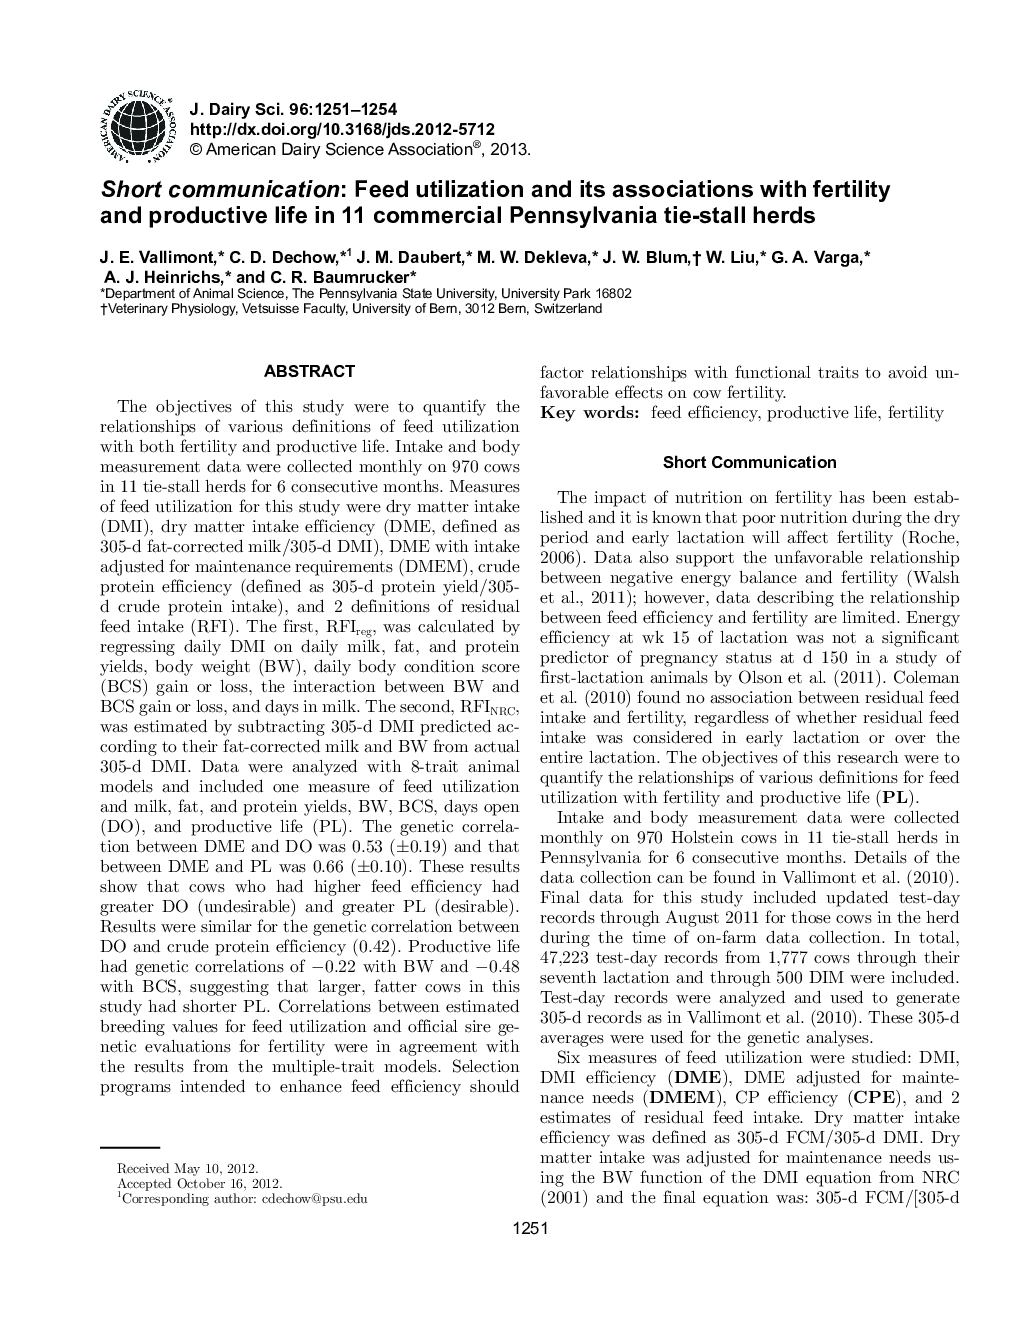 Short communication: Feed utilization and its associations with fertility and productive life in 11 commercial Pennsylvania tie-stall herds